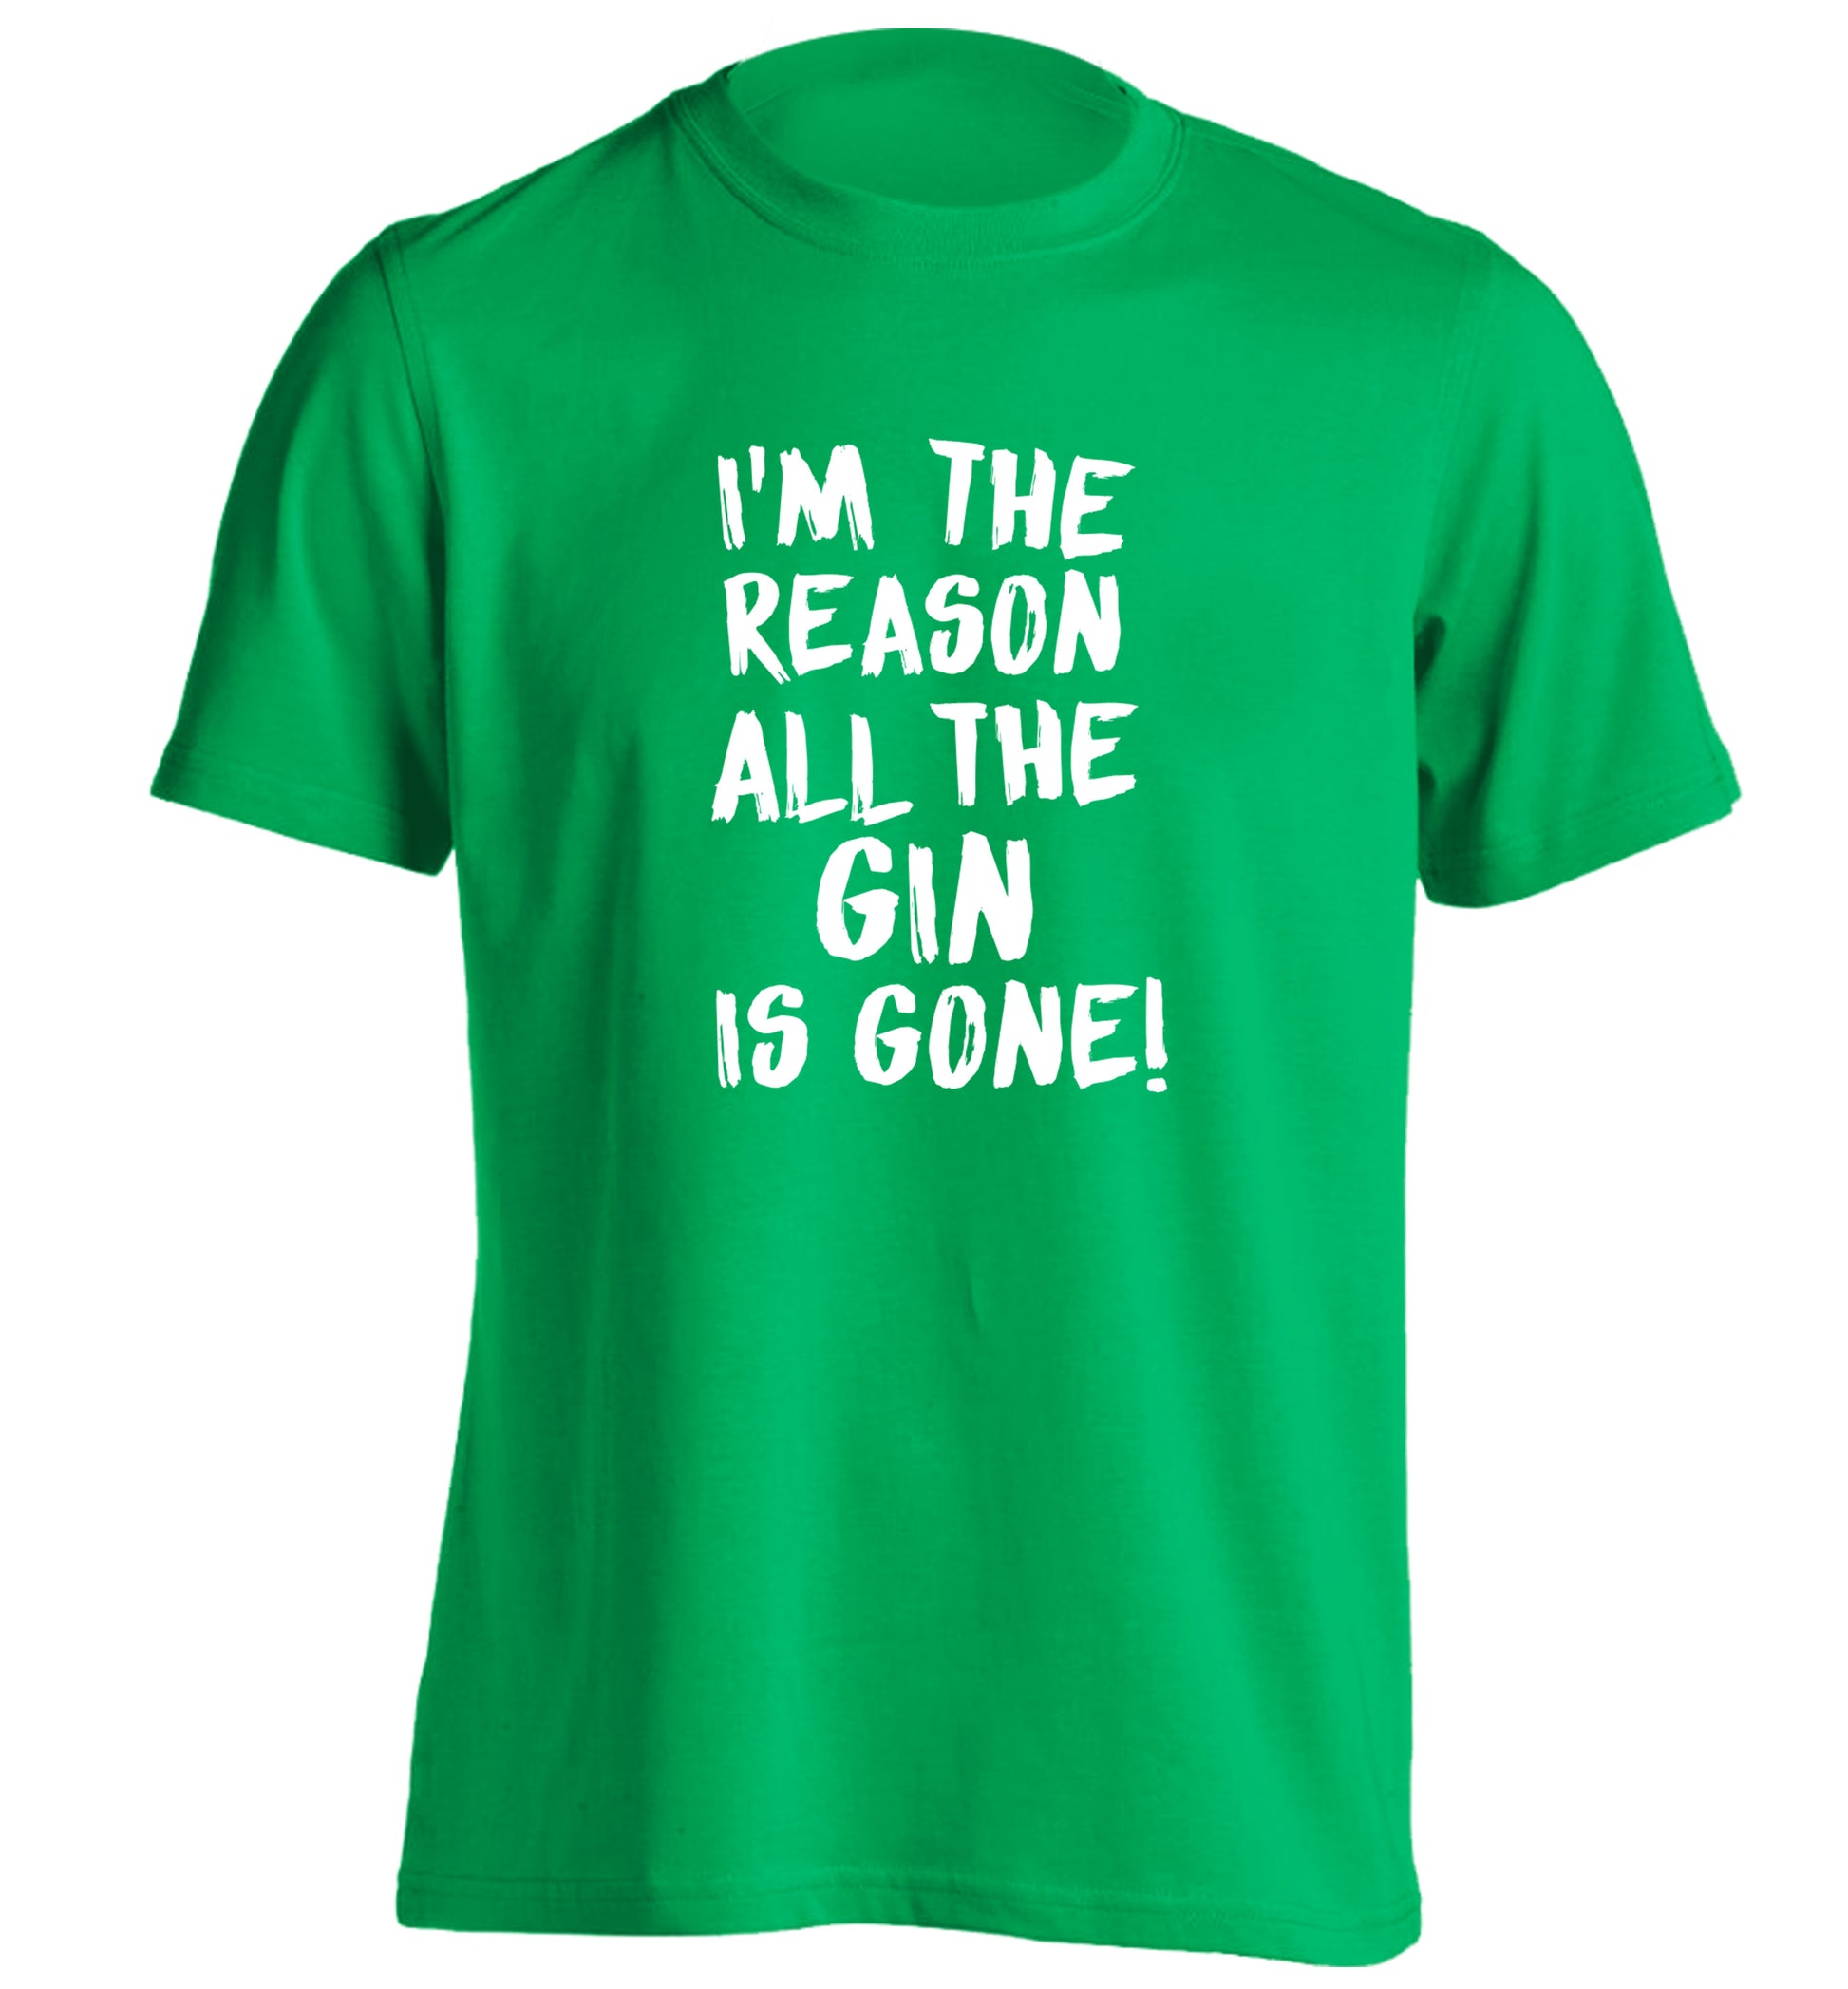 I'm the reason all the gin is gone adults unisex green Tshirt 2XL